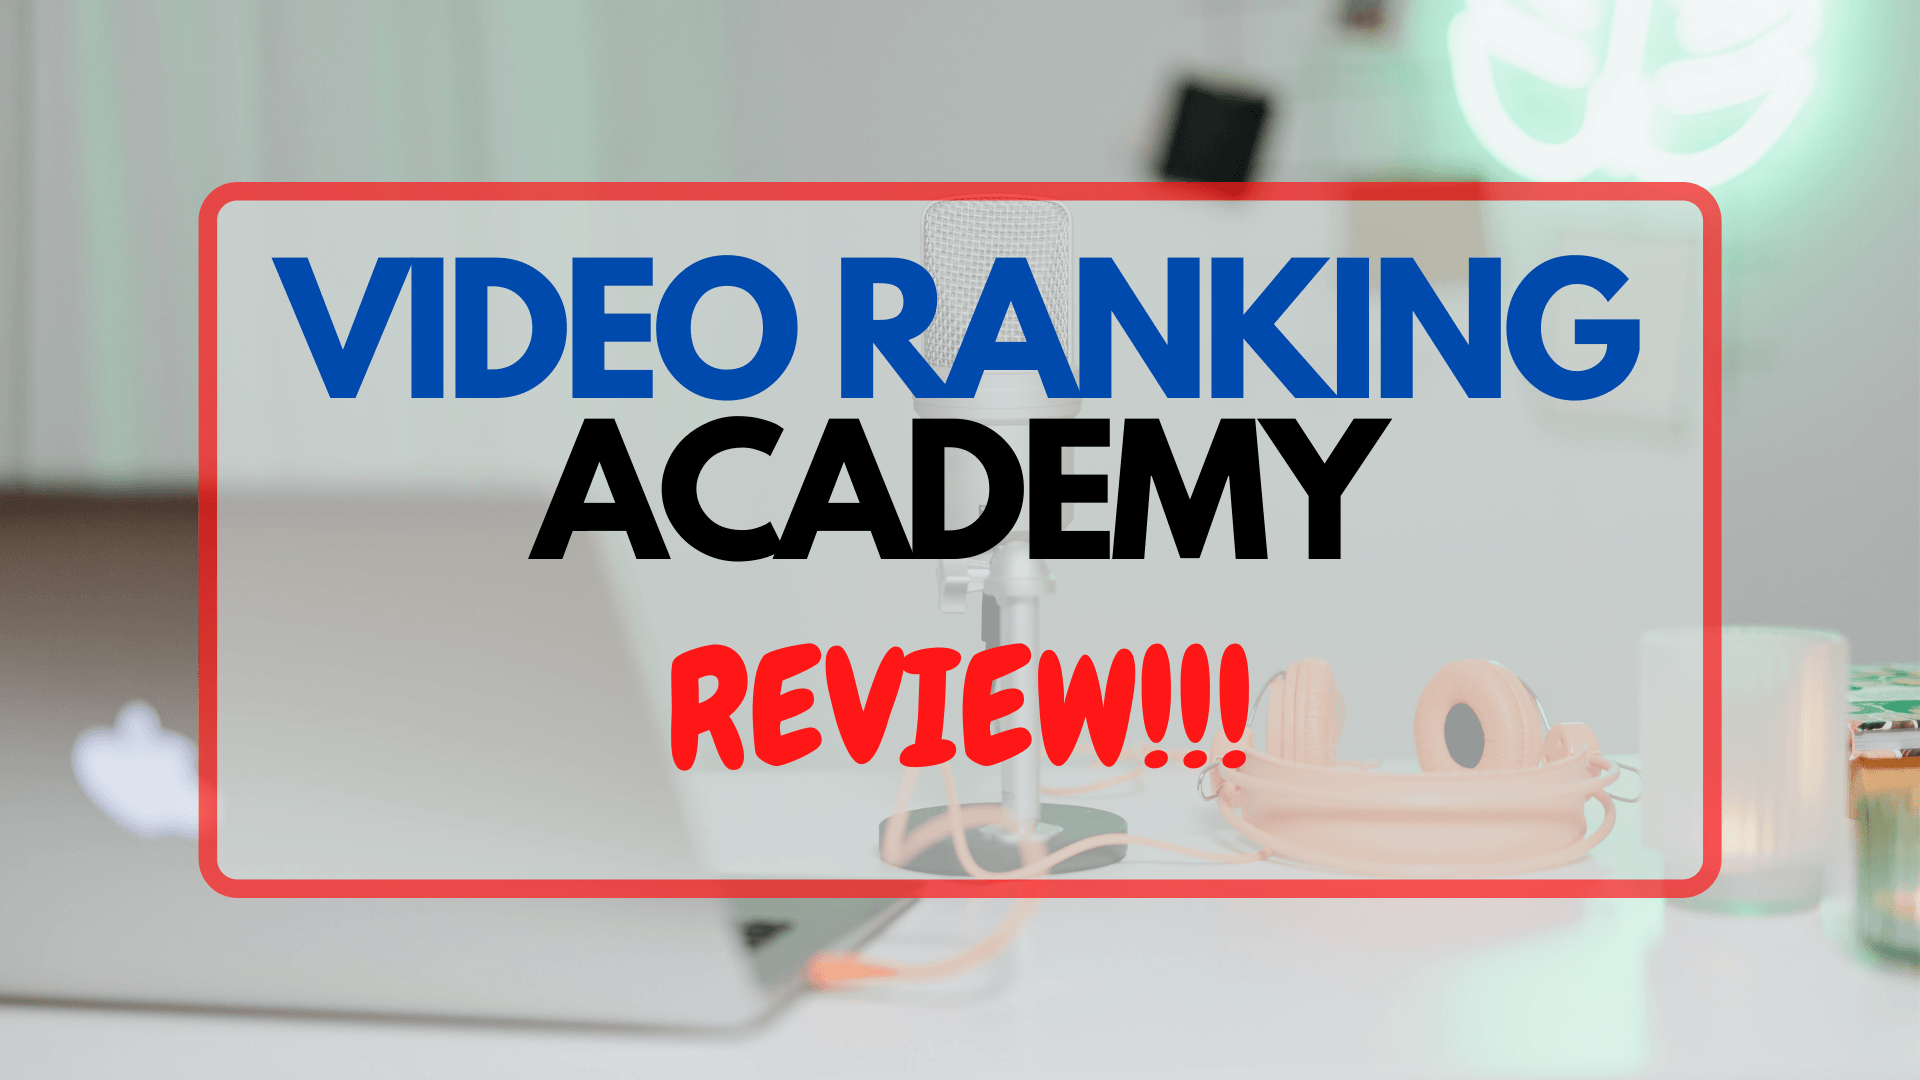 Video Ranking Academy FRONTPAGE